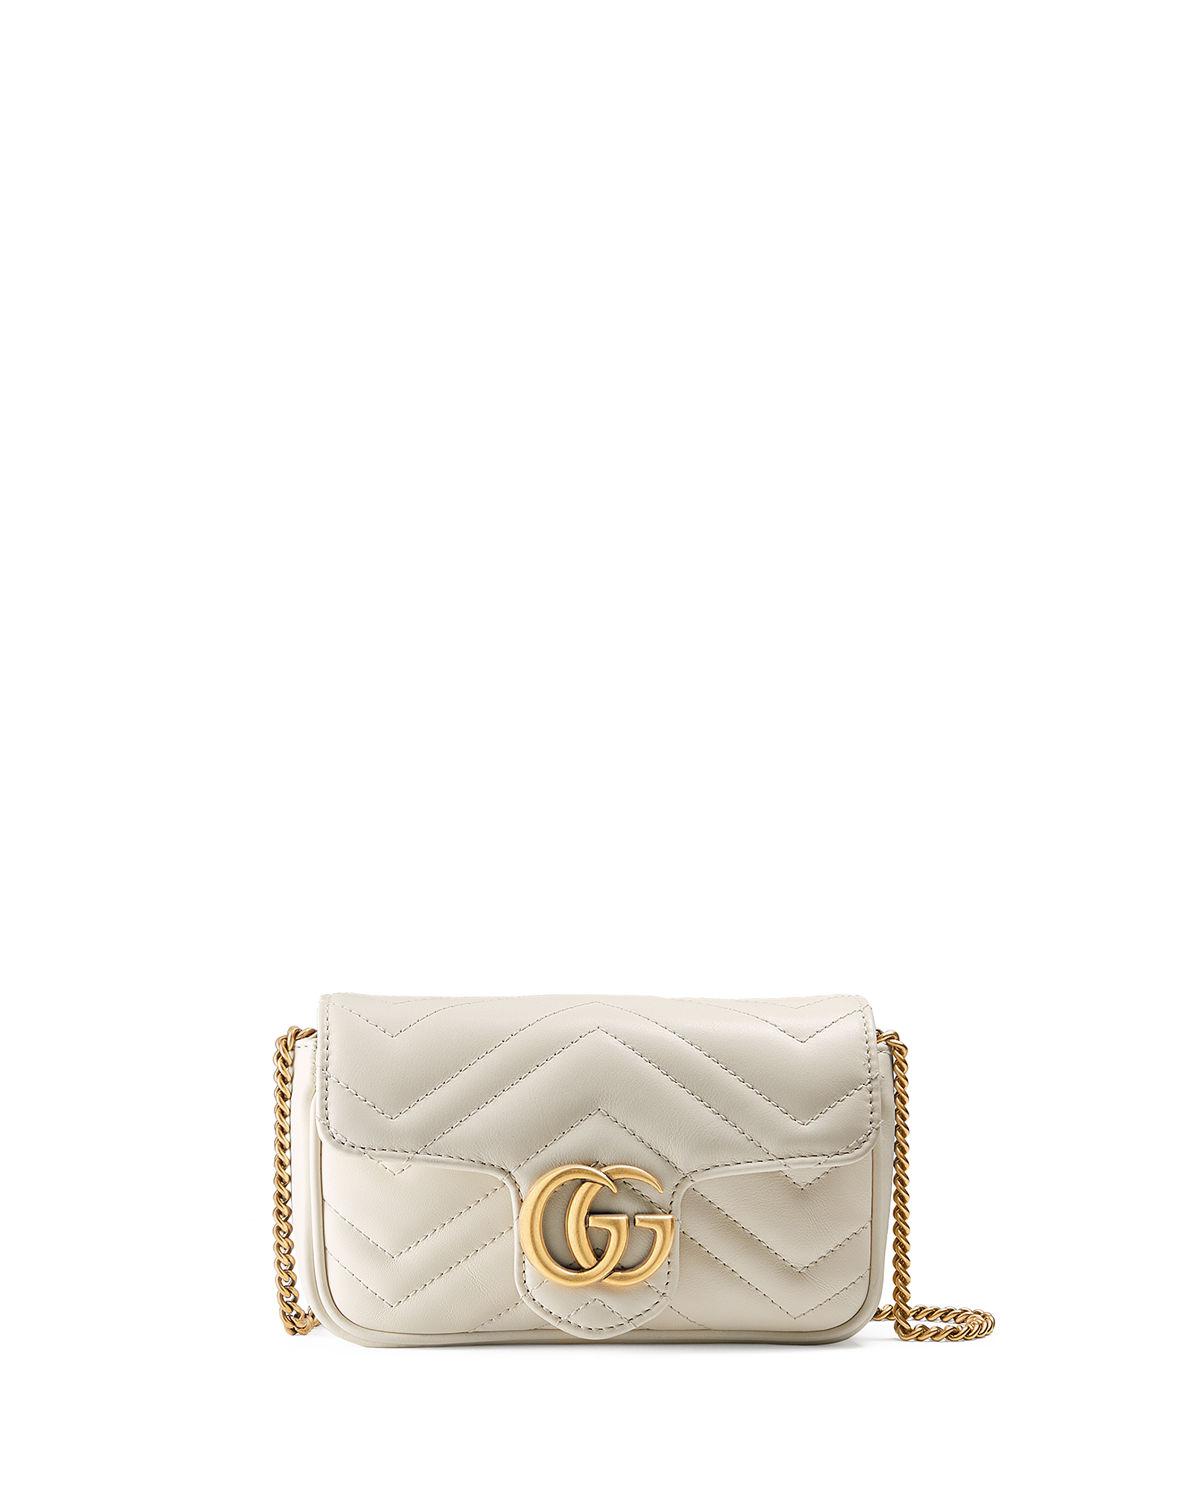 Gucci Supermini Quilted Leather Chain Shoulder Bag in White - Lyst